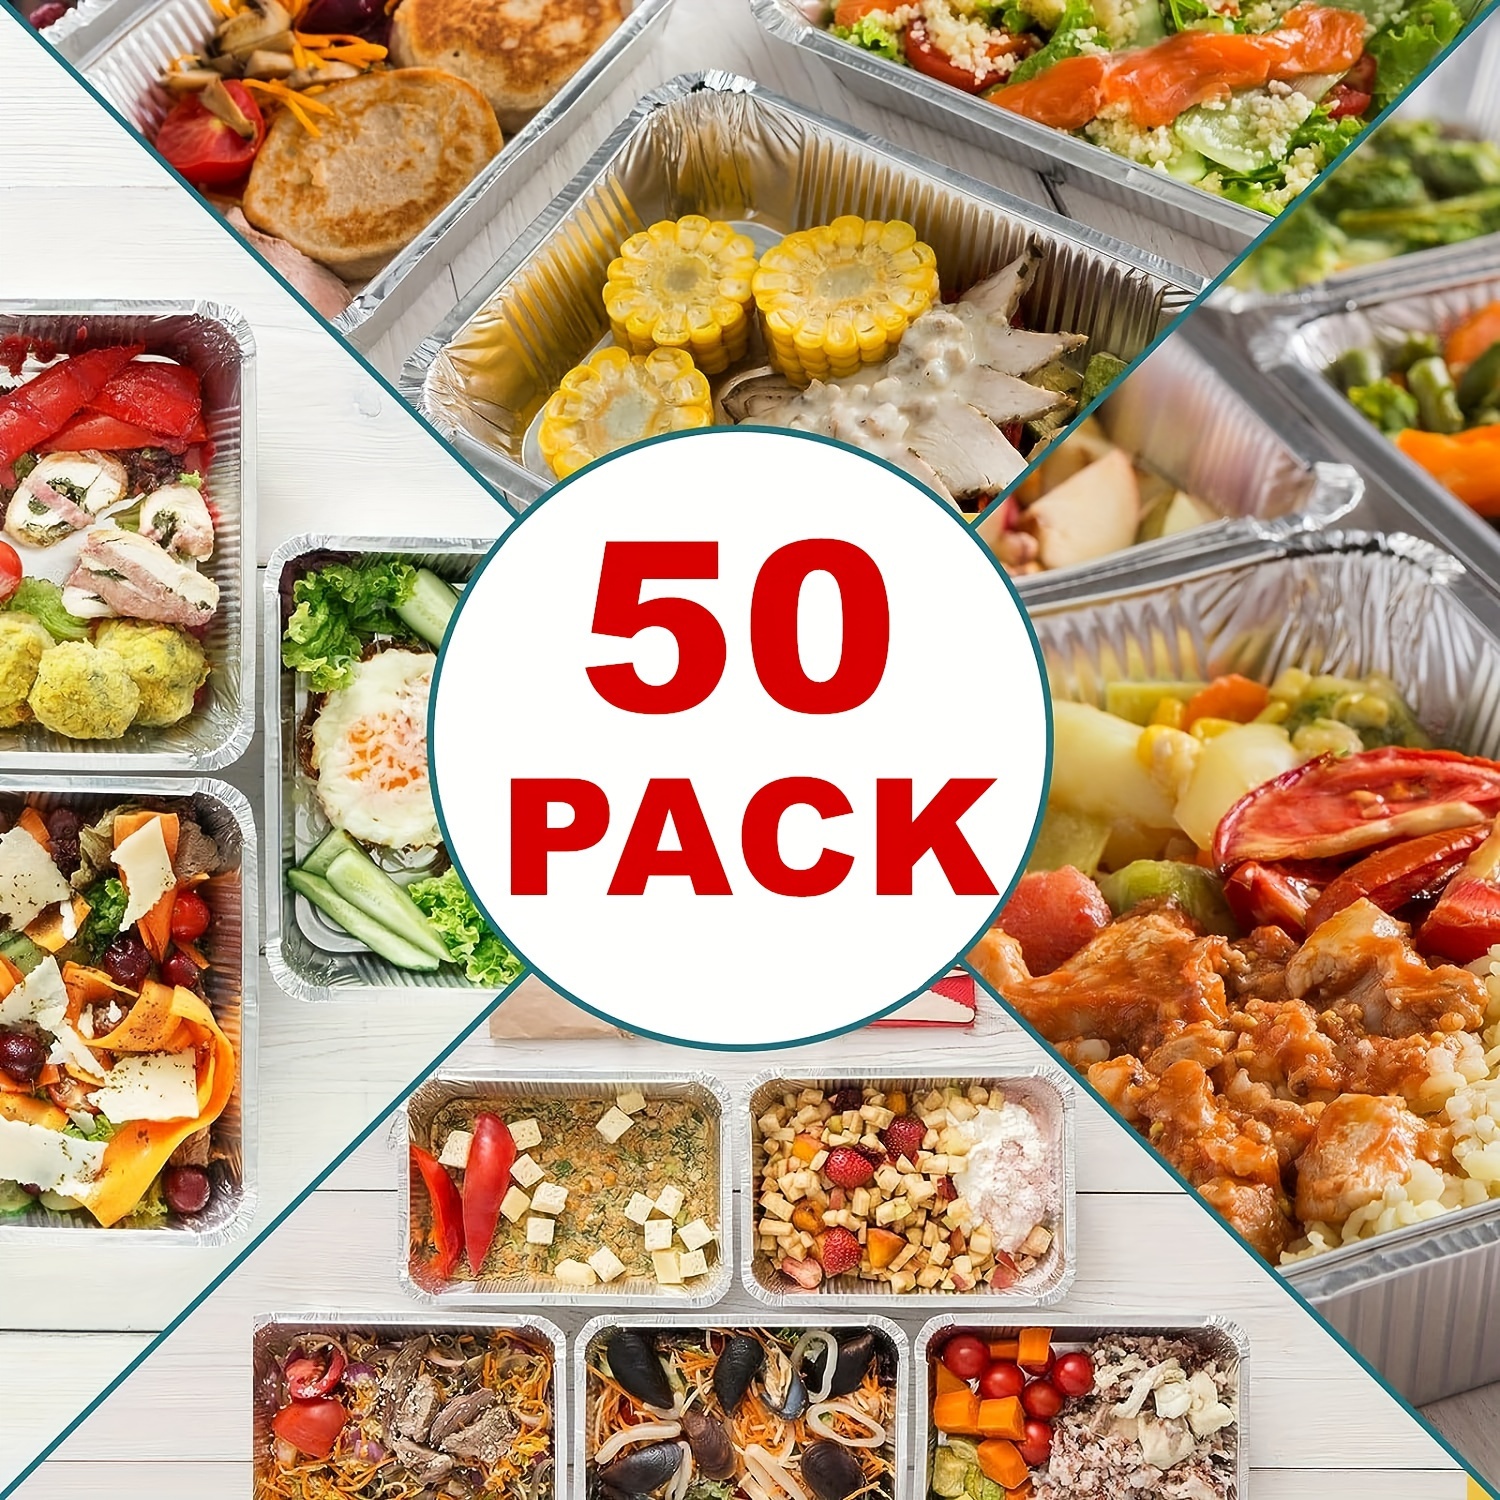 Glad 50 Pack Disposable Lunch Box Reusable Meal Prep Square Food Containers